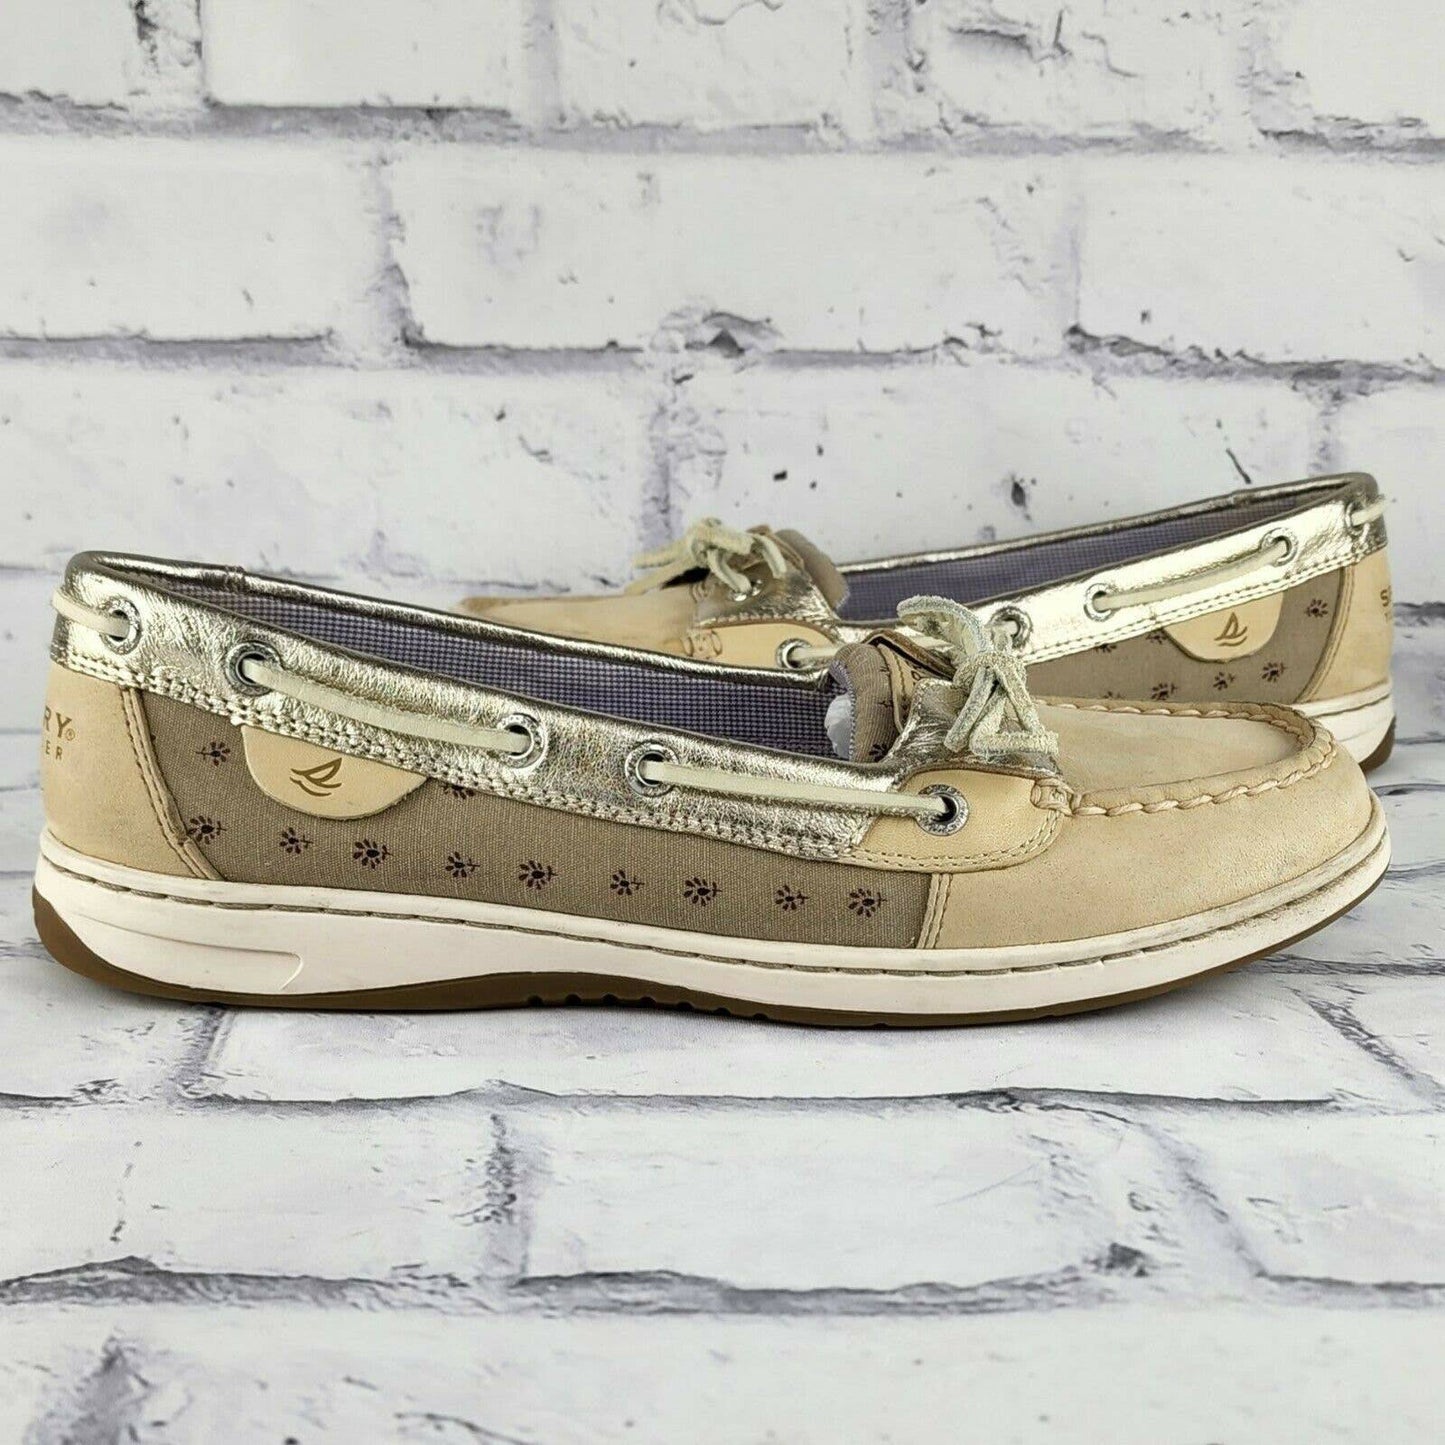 Sperry Top Sider Women's Sz 9M Silver Angelfish Beige Leather Deck Boat Shoes